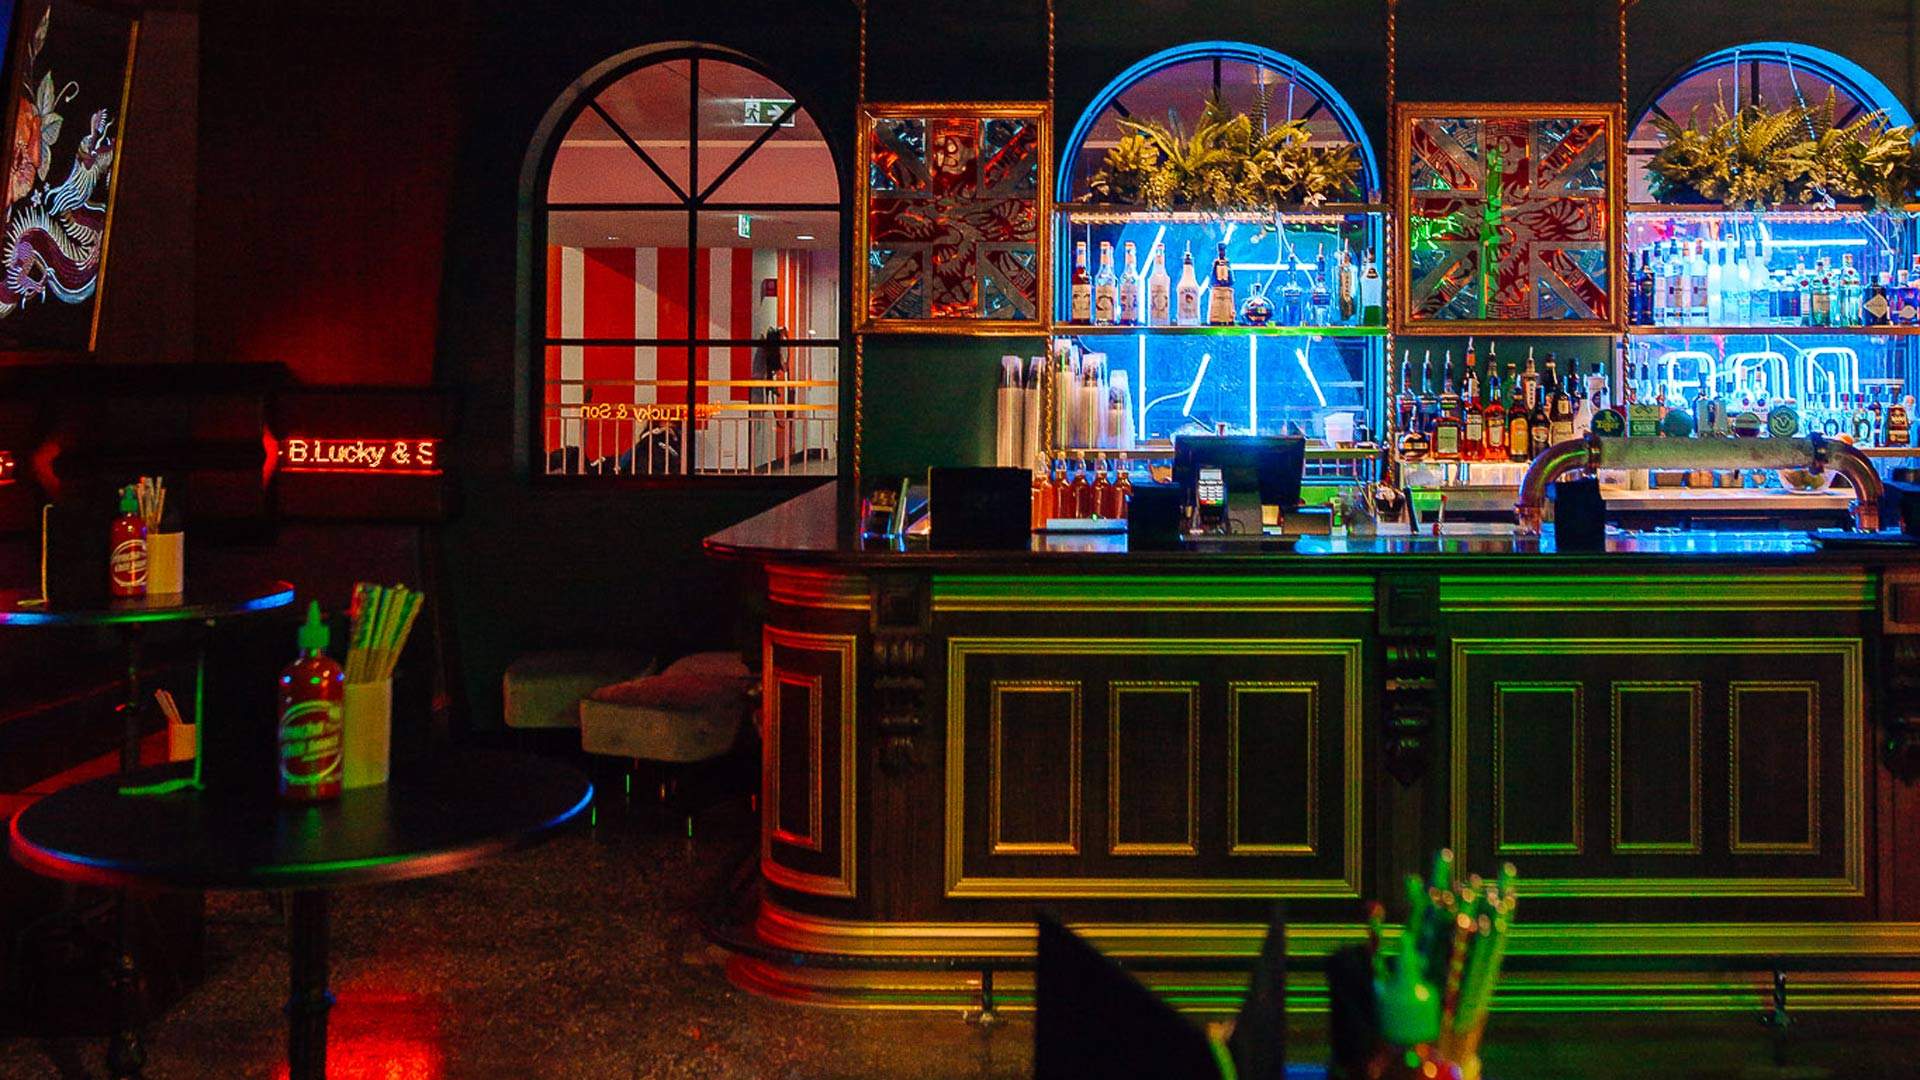 A New Adults-Only Arcade Bar from the Holey Moley Team Has Just Opened in the CBD